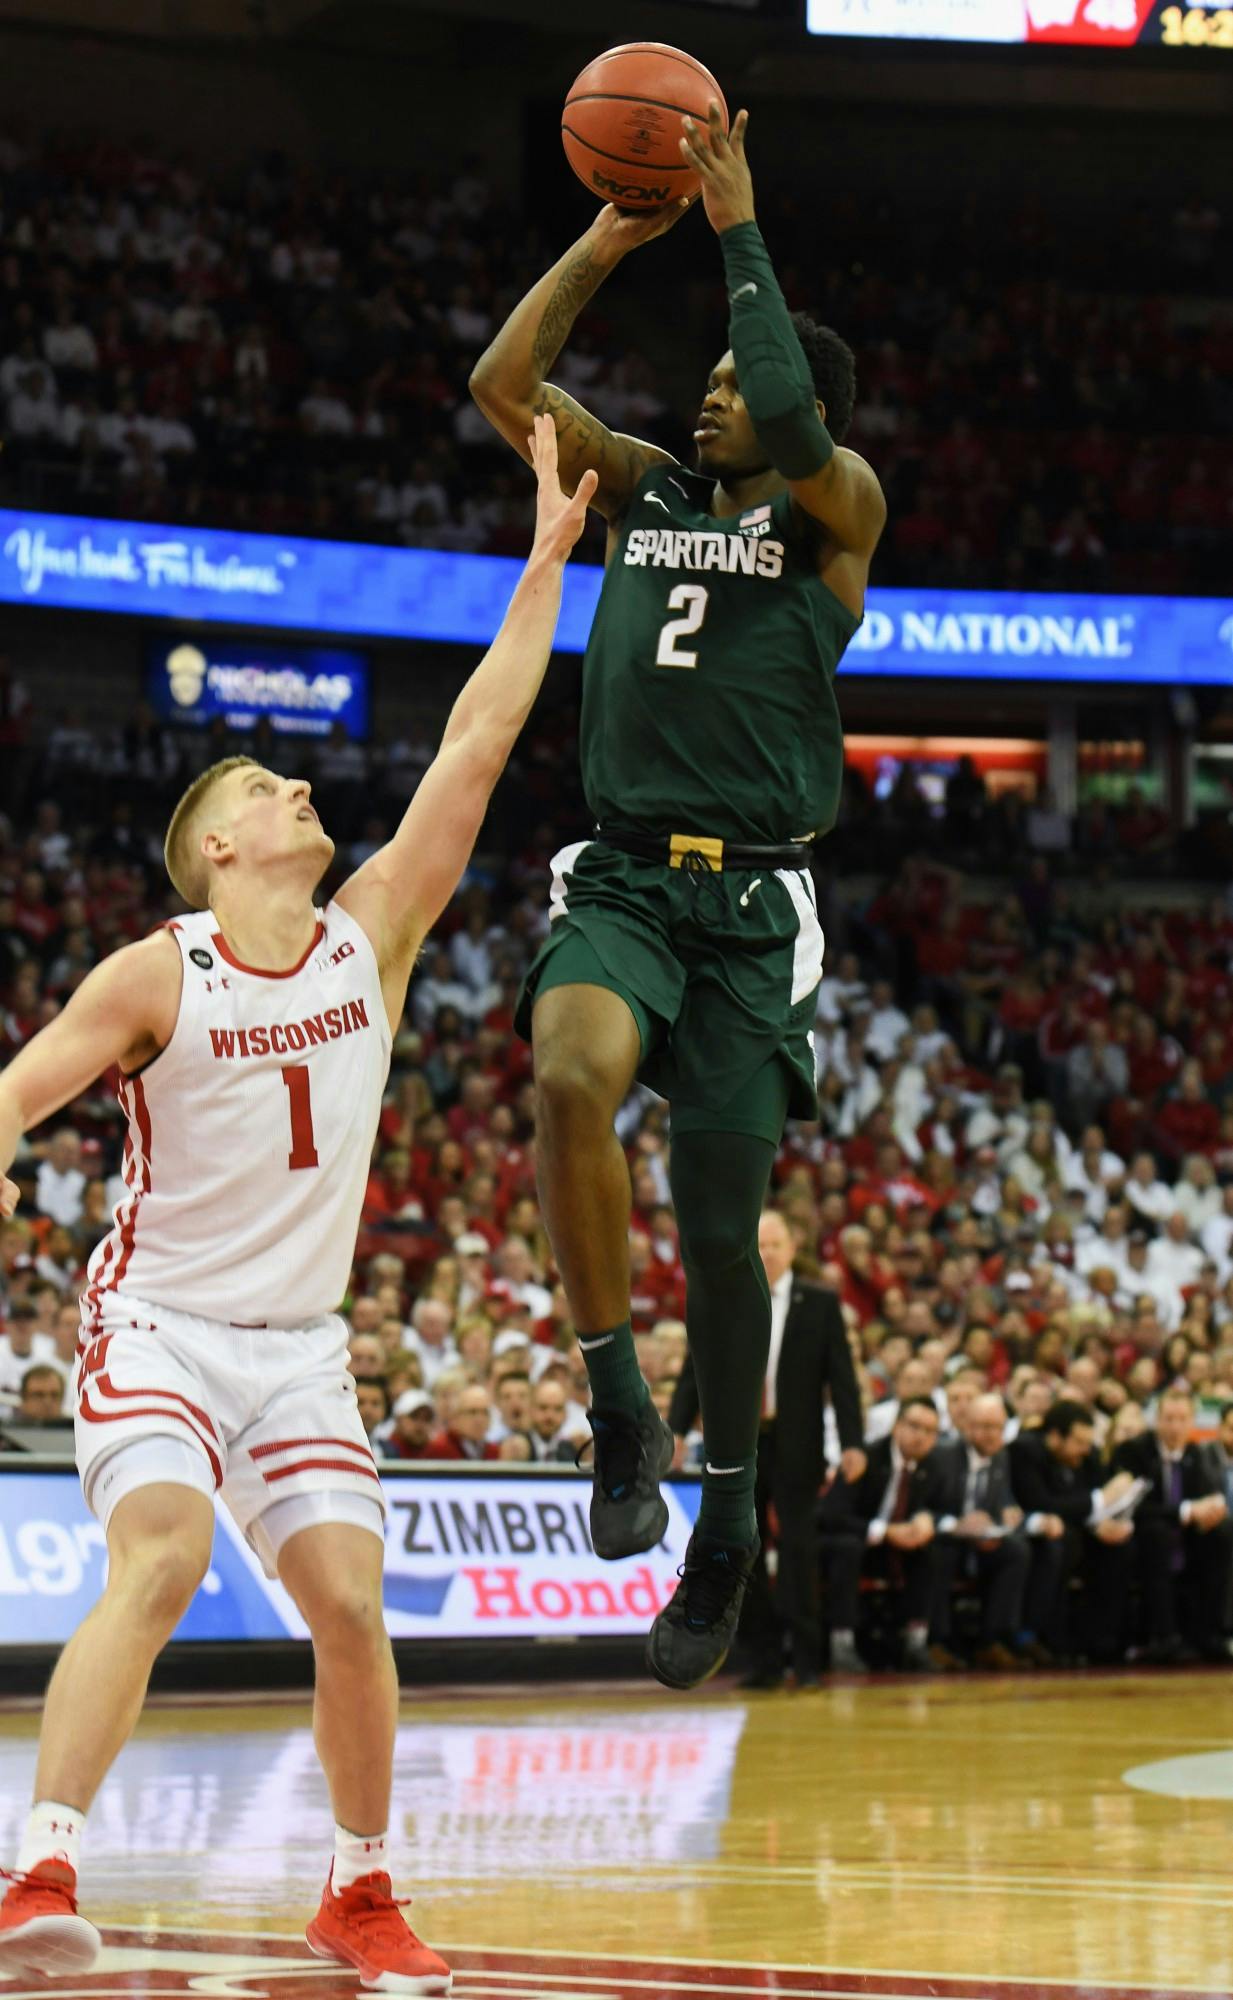 <p>Freshman guard Rocket Watts (2) shoots over a defender during the basketball game against Wisconsin on Feb. 1, 2020 at the Kohl Center in Madison, Wisconsin. The Spartans fell to the Badgers, 63-64.</p>